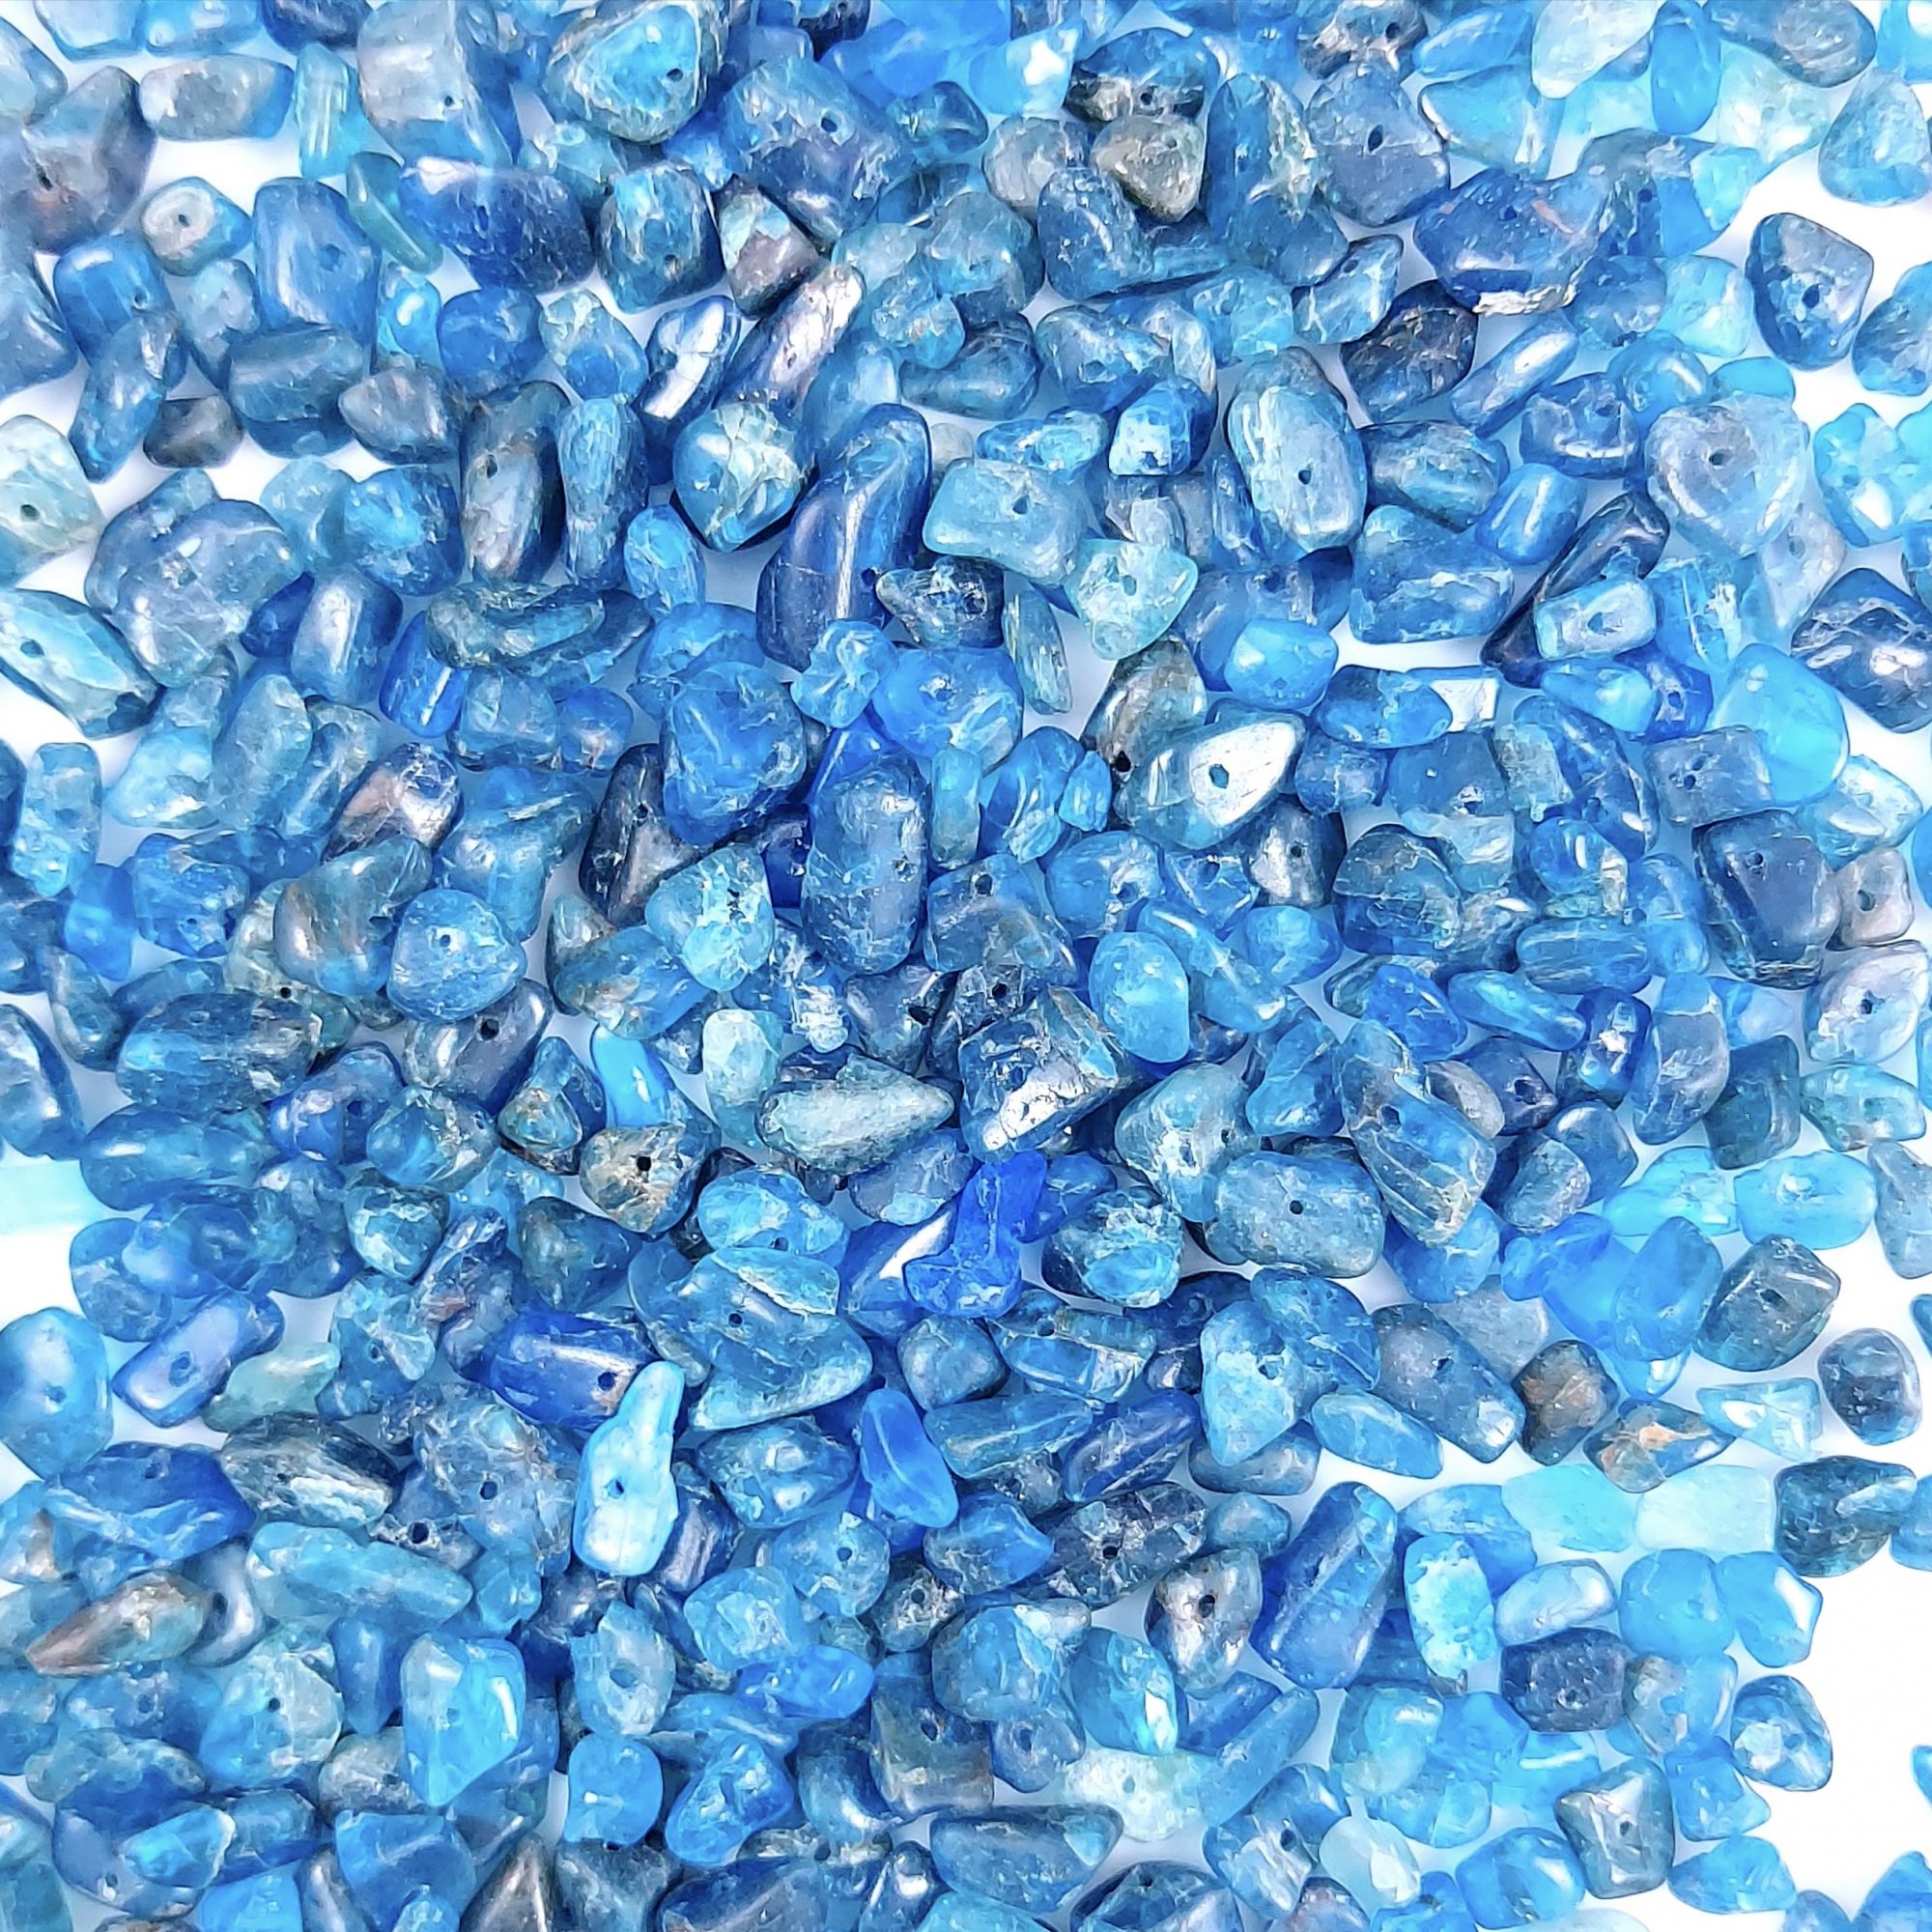 581Pcs 689Cts  Natural Blue Apatite Gemstone Chips Uncut Beads for Jewelry Making Center Drill Loose Gemstones Nuggets Chips Smooth Beads Bracelet Gift for Her 9x4 5x4mm#G-408